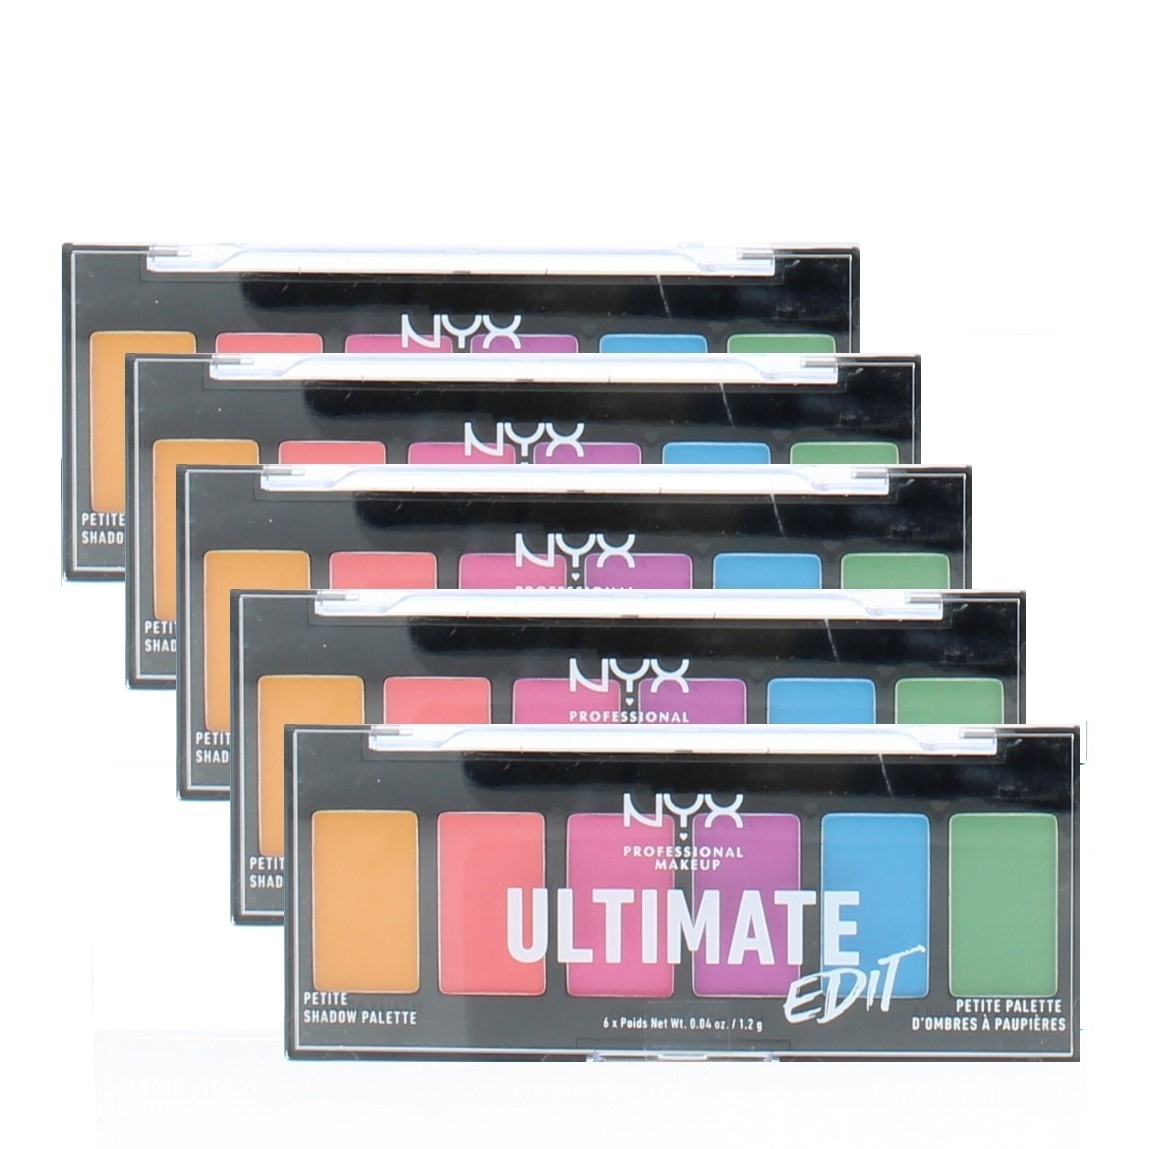 NYX Professional Makeup Ultimate Edit Petite Shadow Palette- Brights (6 Shades X 0.04oz) 0.24oz/7.2g (5 Pack)